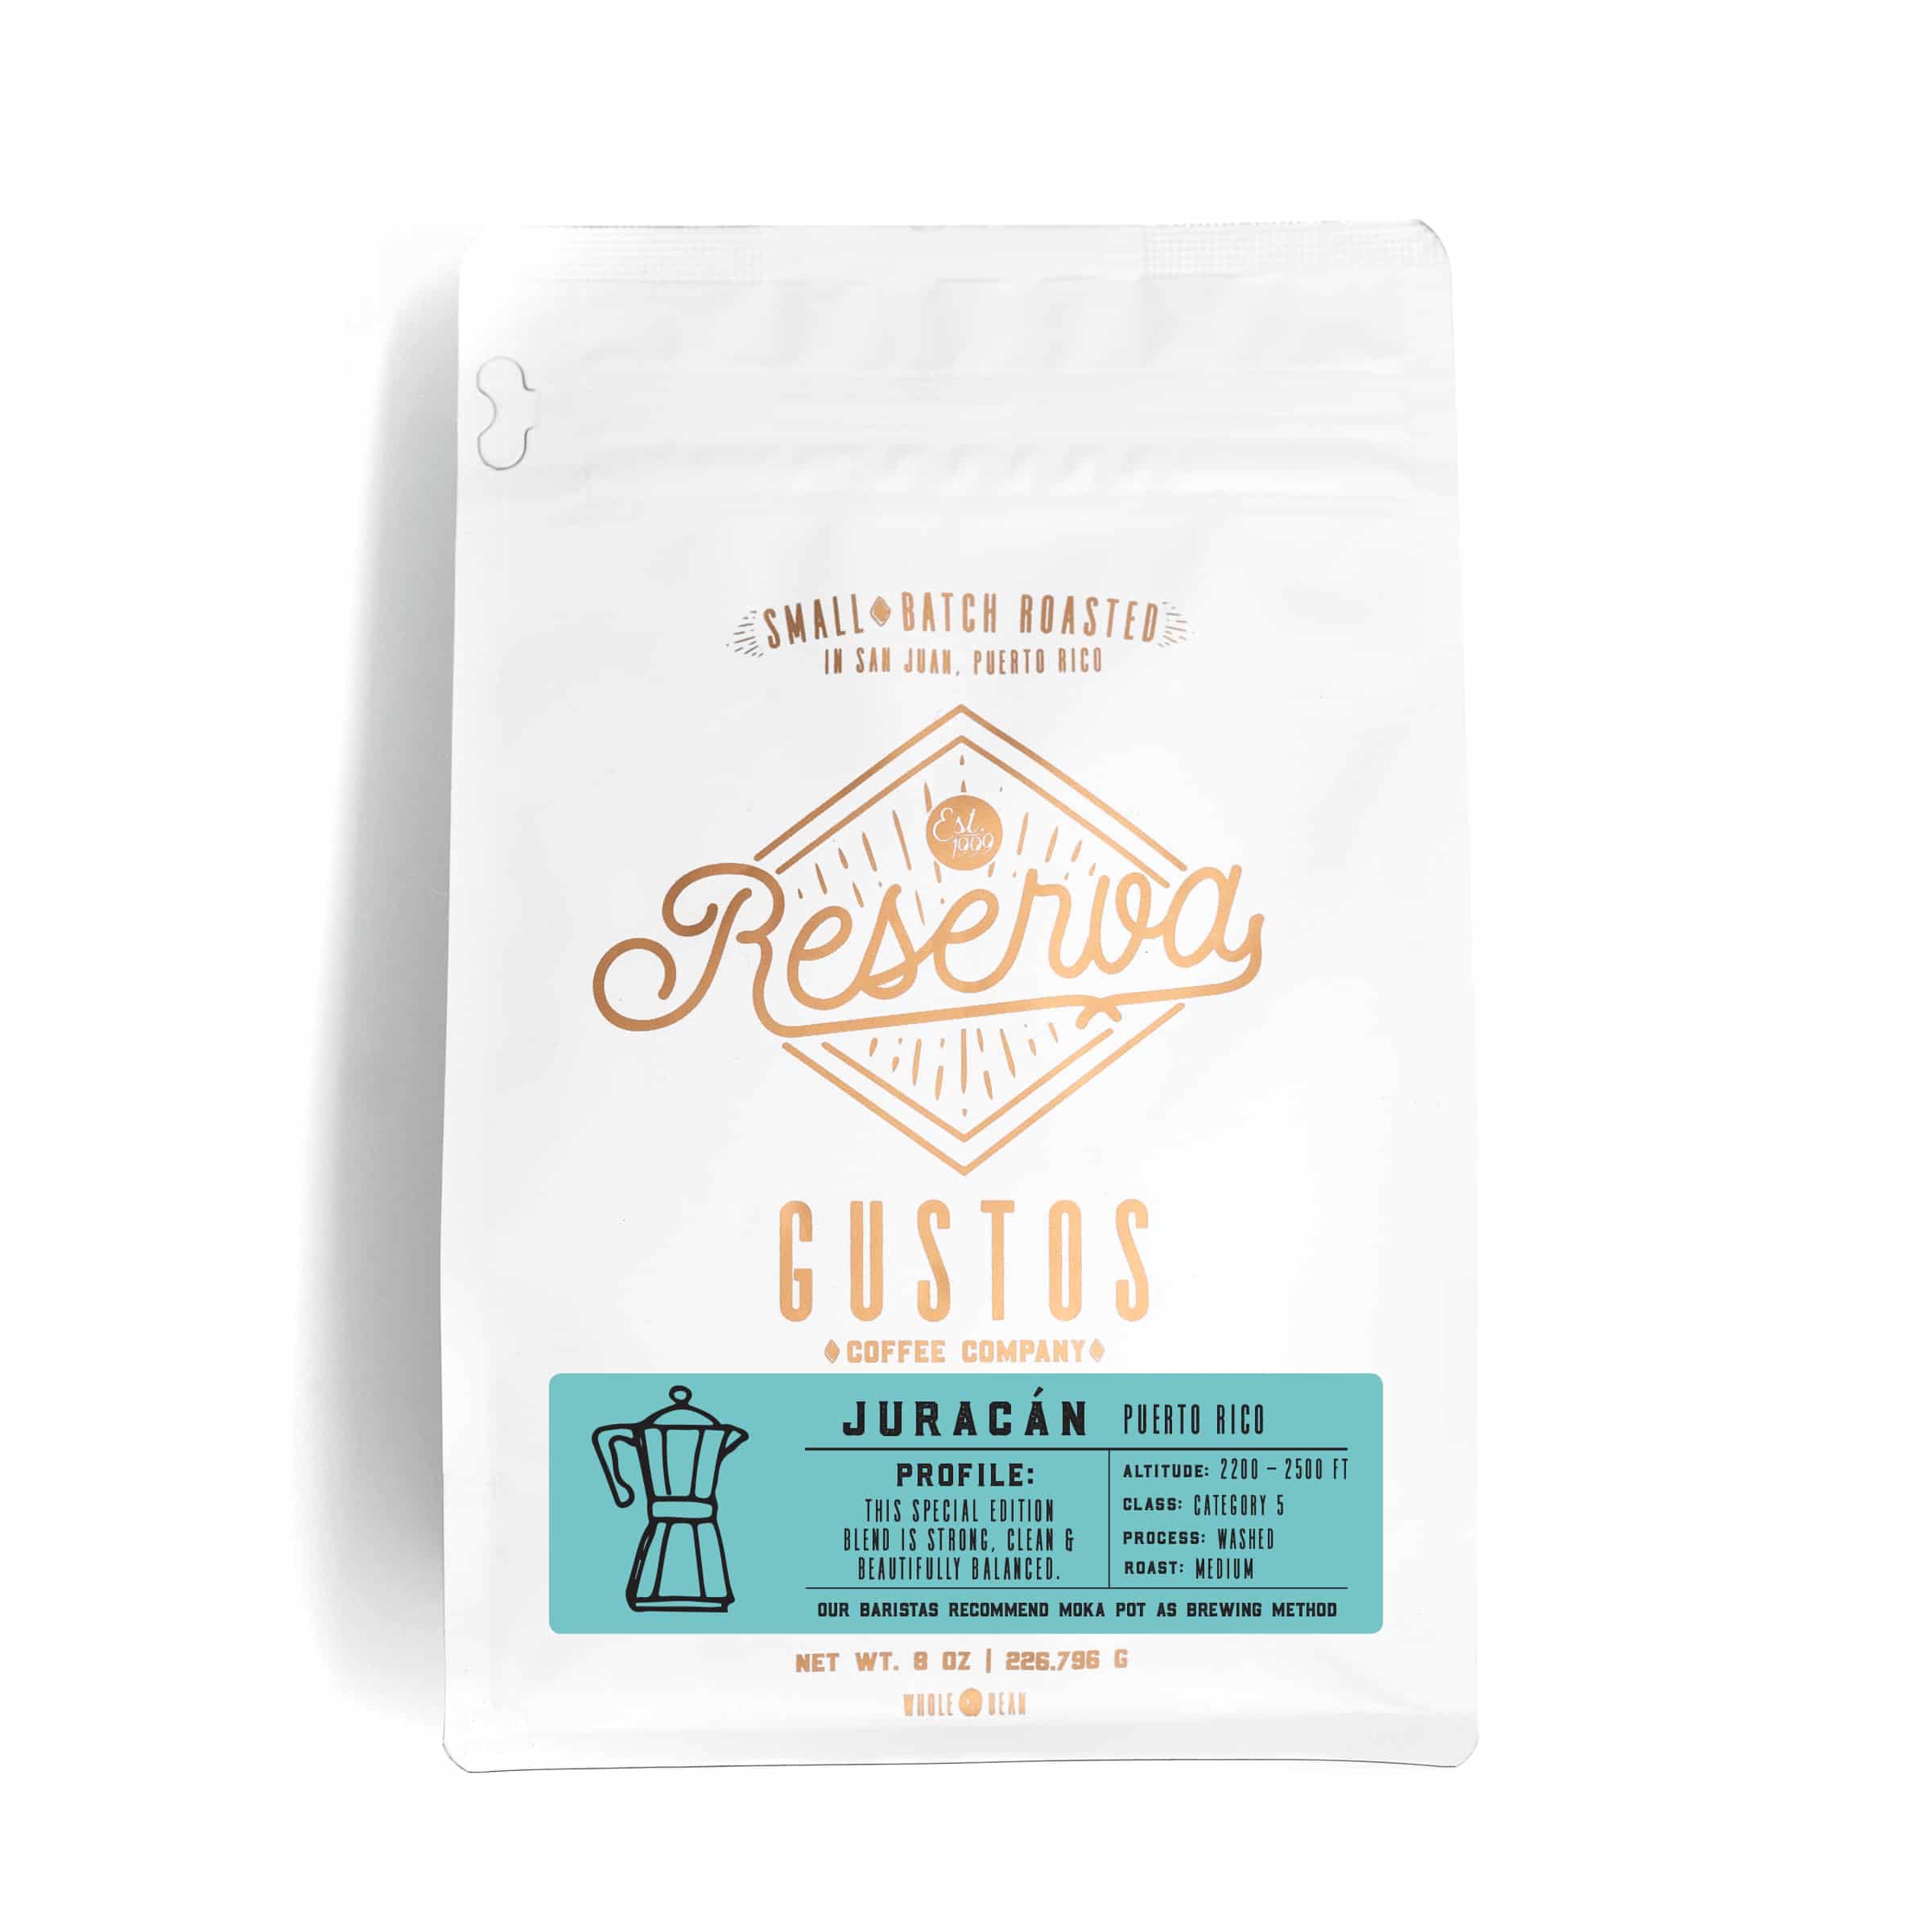 A bag of Specialty Coffee from PR Juracán by Gustos Coffee Co cafe especialidad